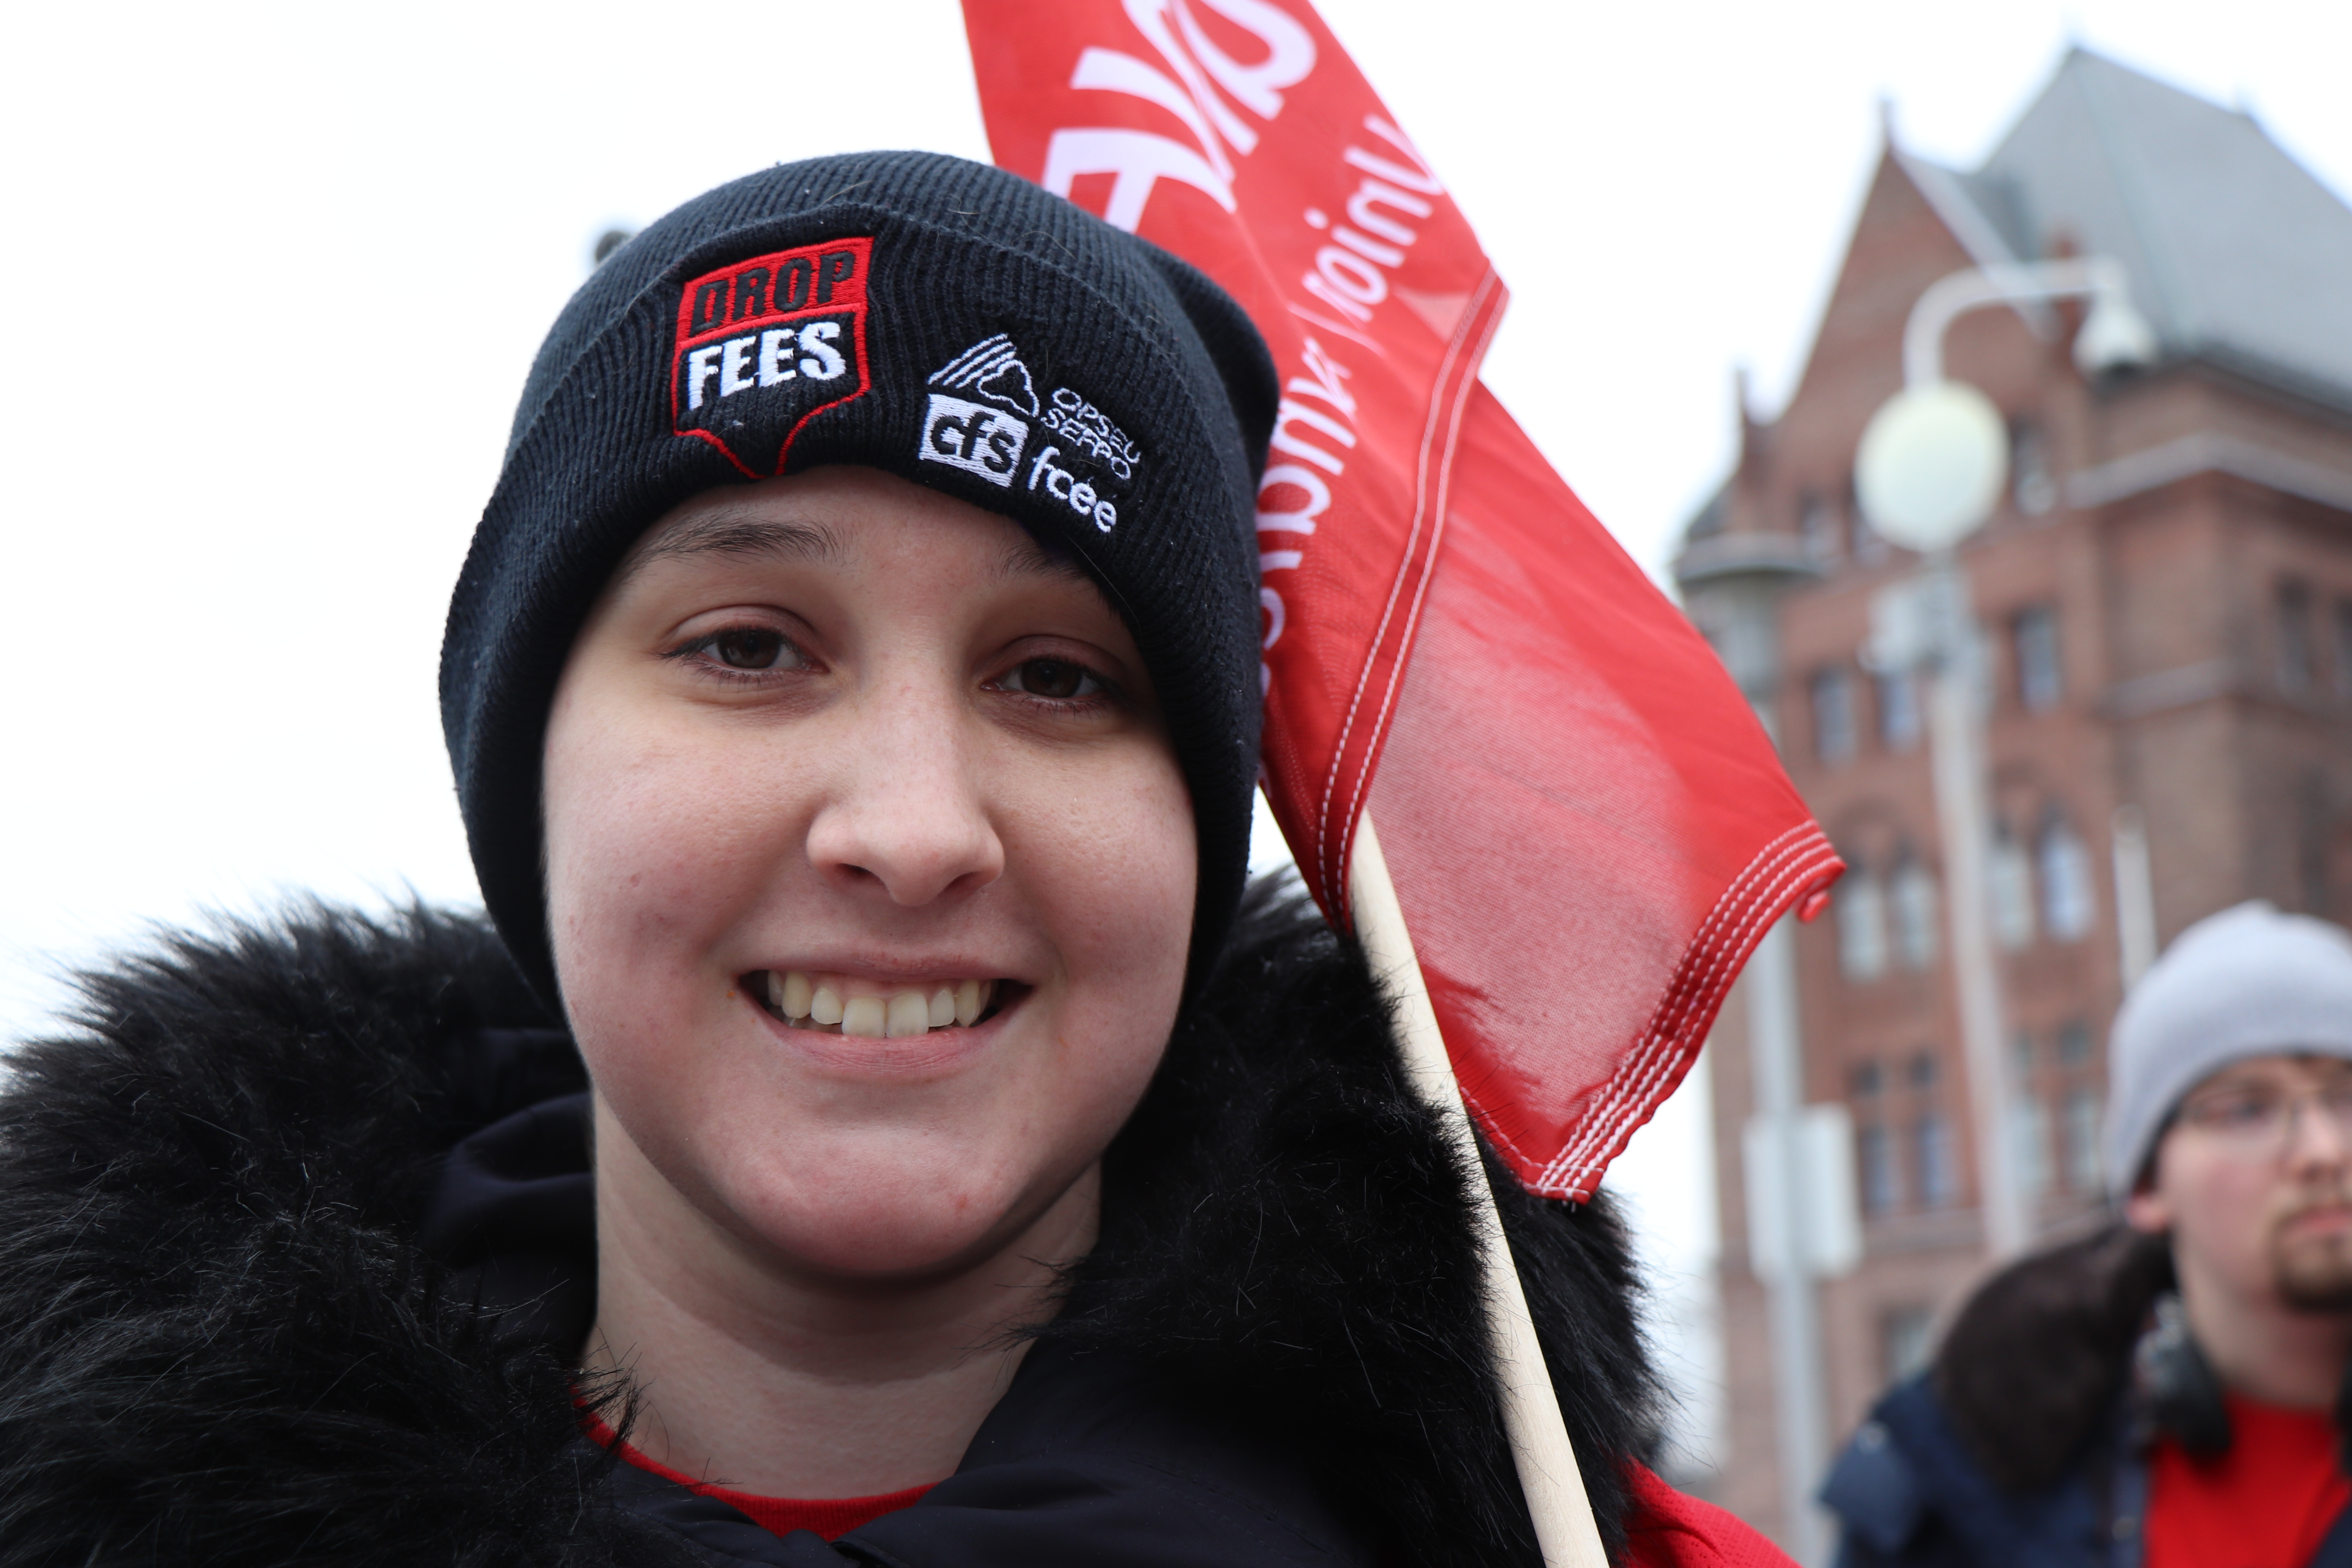 Kaitlyn Teller, a support staff worker at UOIT, waves a banner during the protest against tuition cuts and ancillary fee changes on Jan. 19 at Queen’s Park. Photo: Emma Sandri 